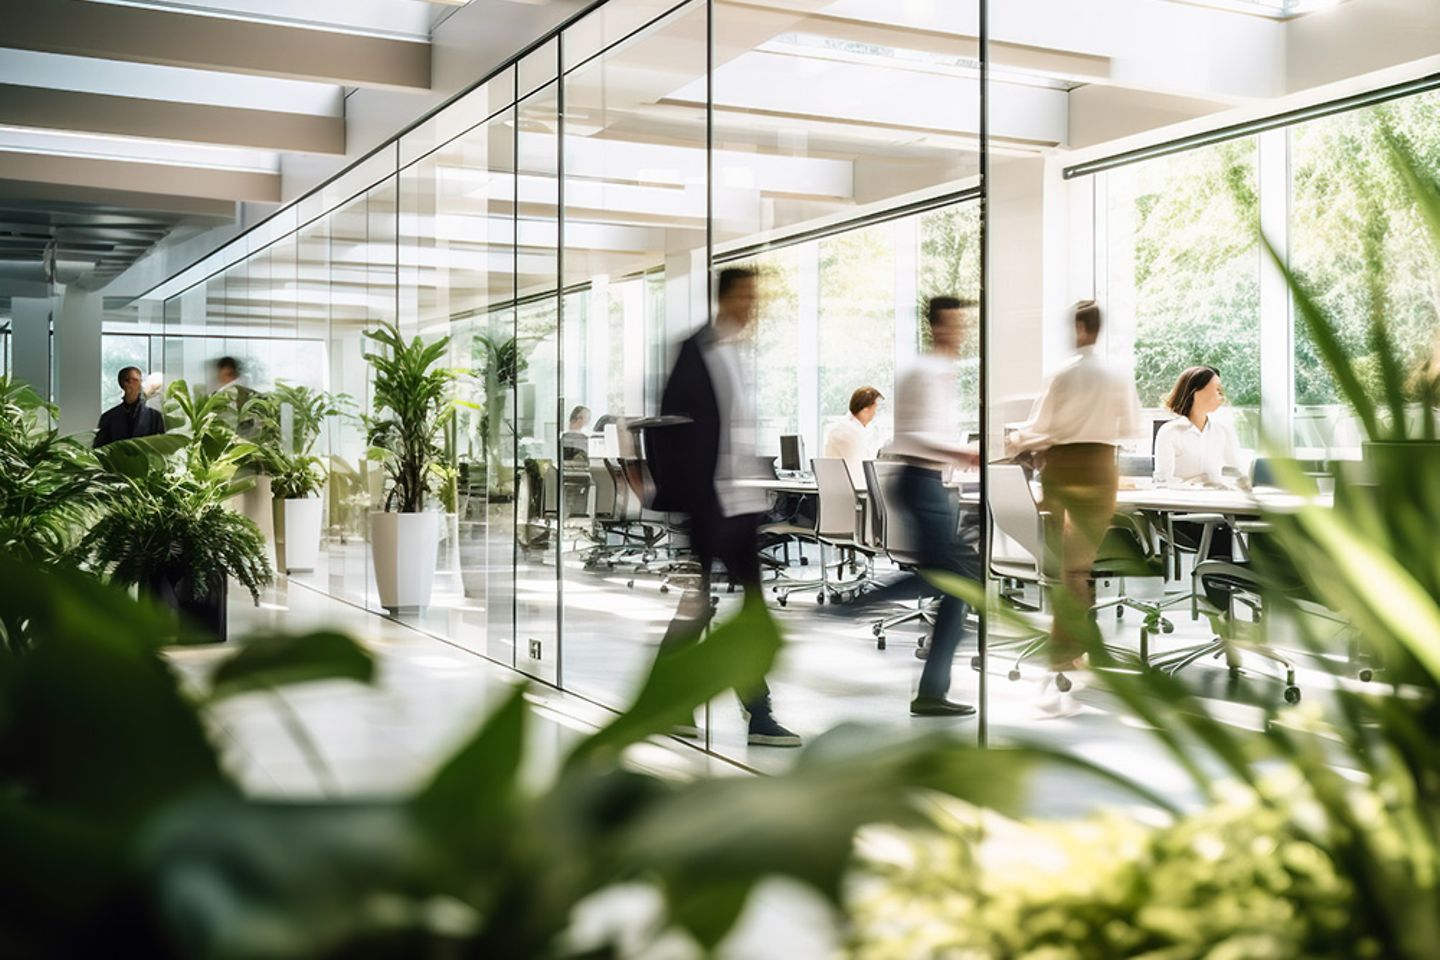 People moving blurred in office building with many plants